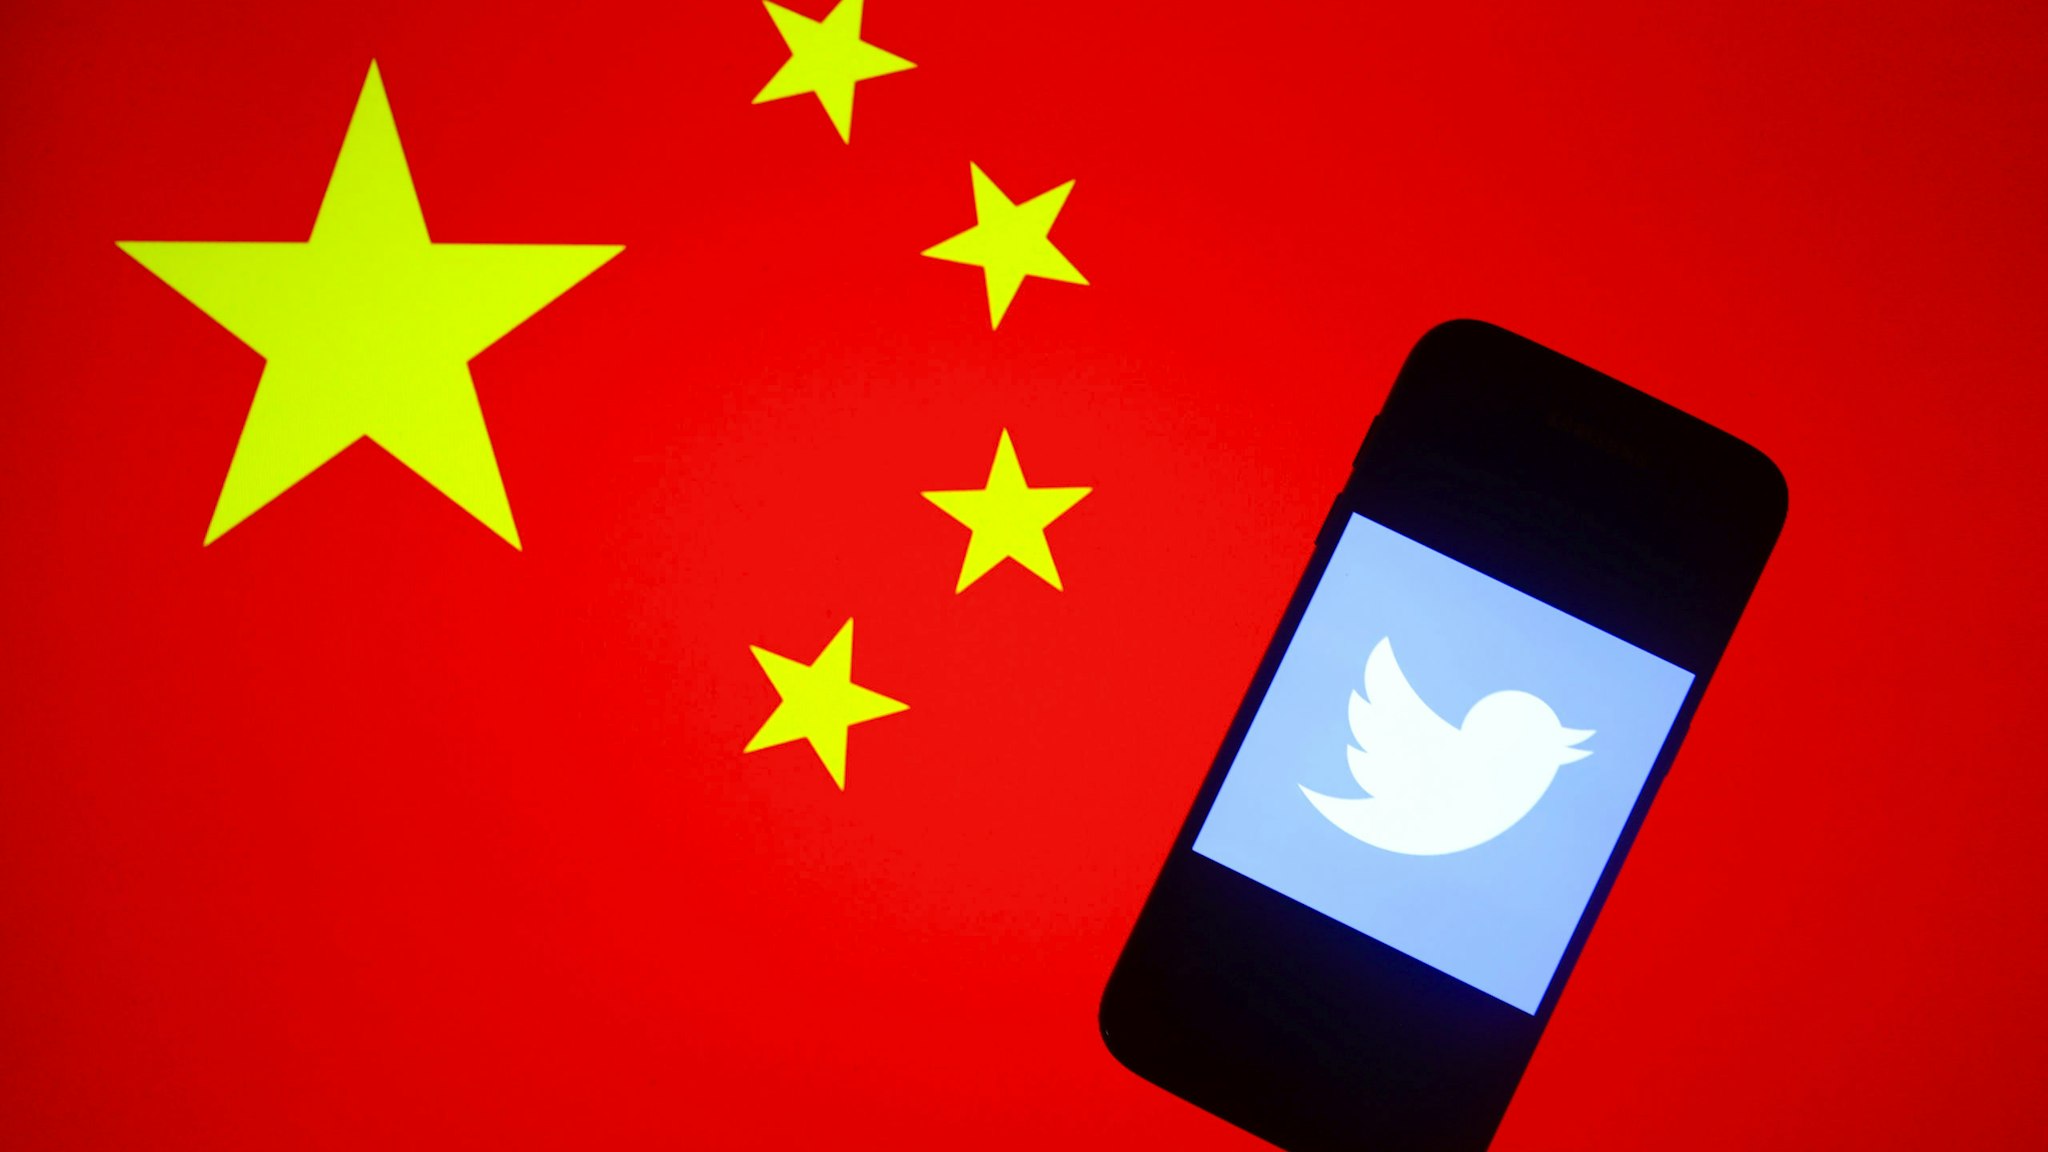 witter logo is displayed on a mobile phone screen photographed on the People's Republic of China national flag background arranged for illustration photo taken in Krakow, Poland on 15th January, 2020. (Photo illustration by Beata Zawrzel/NurPhoto via Getty Images)